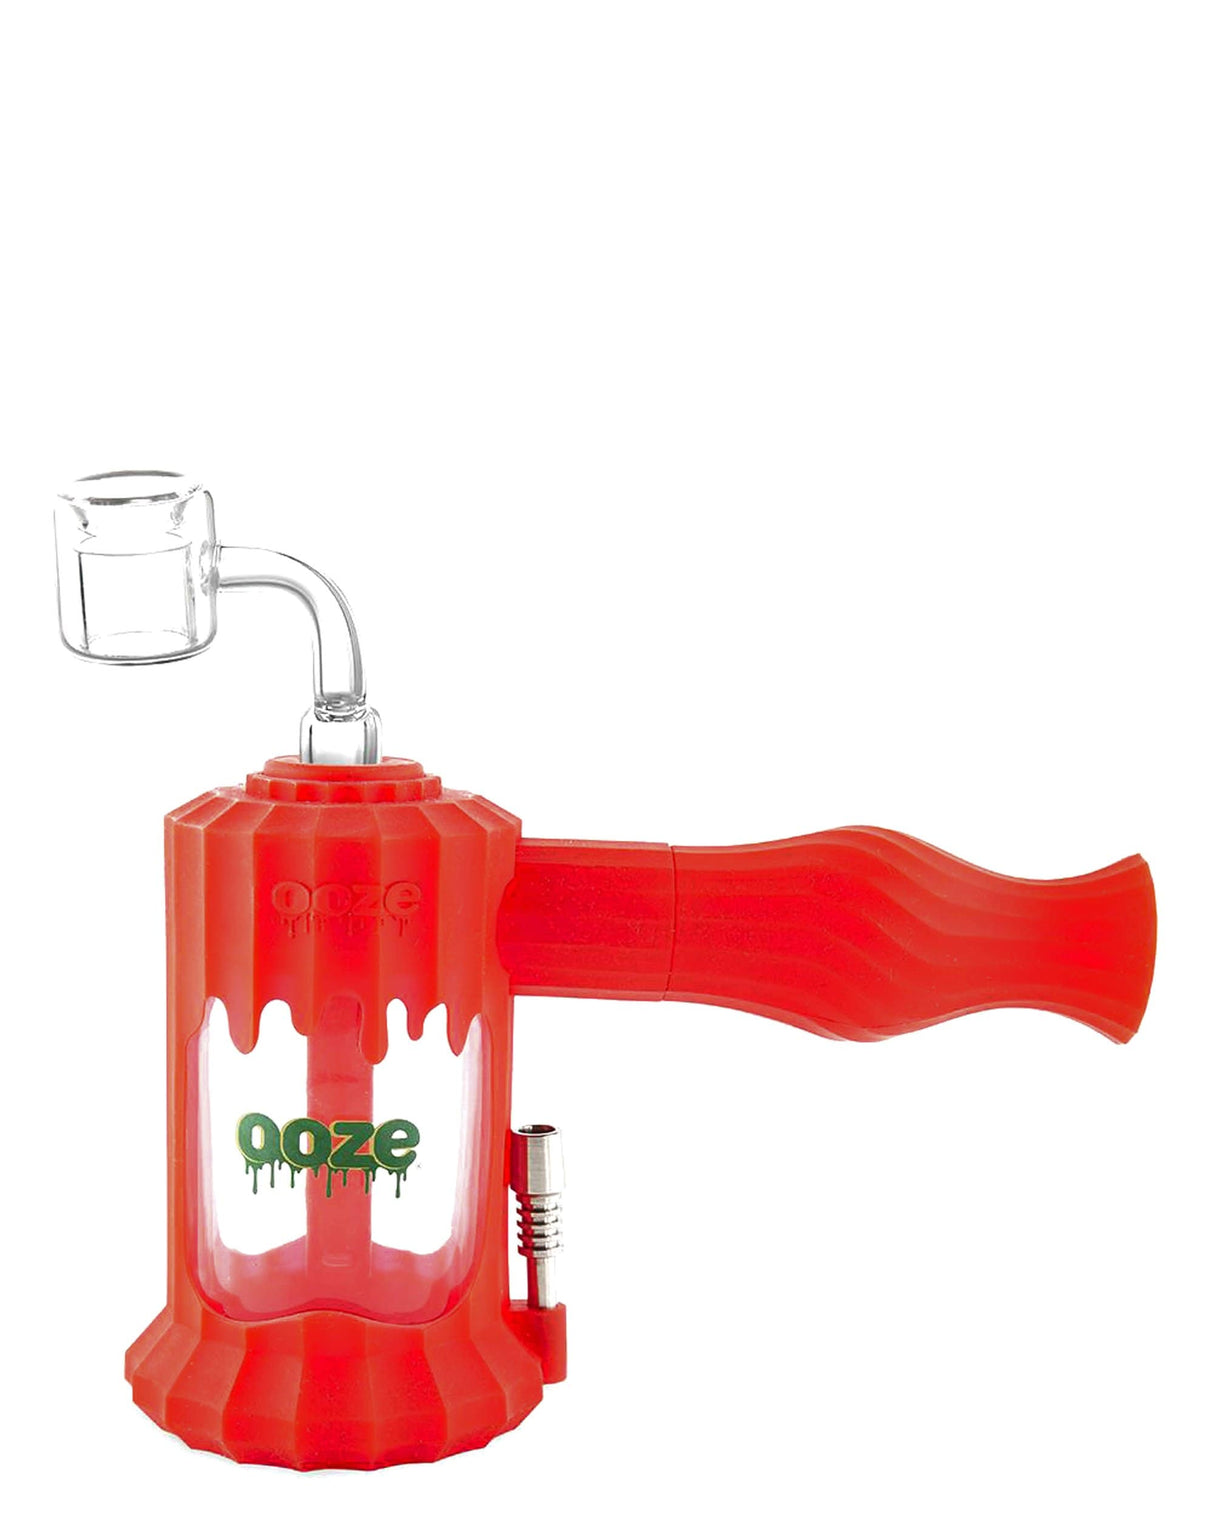 Ooze Clobb 4 in 1 Silicone Pipe in Rasta colors, side view with glass bowl and titanium nail